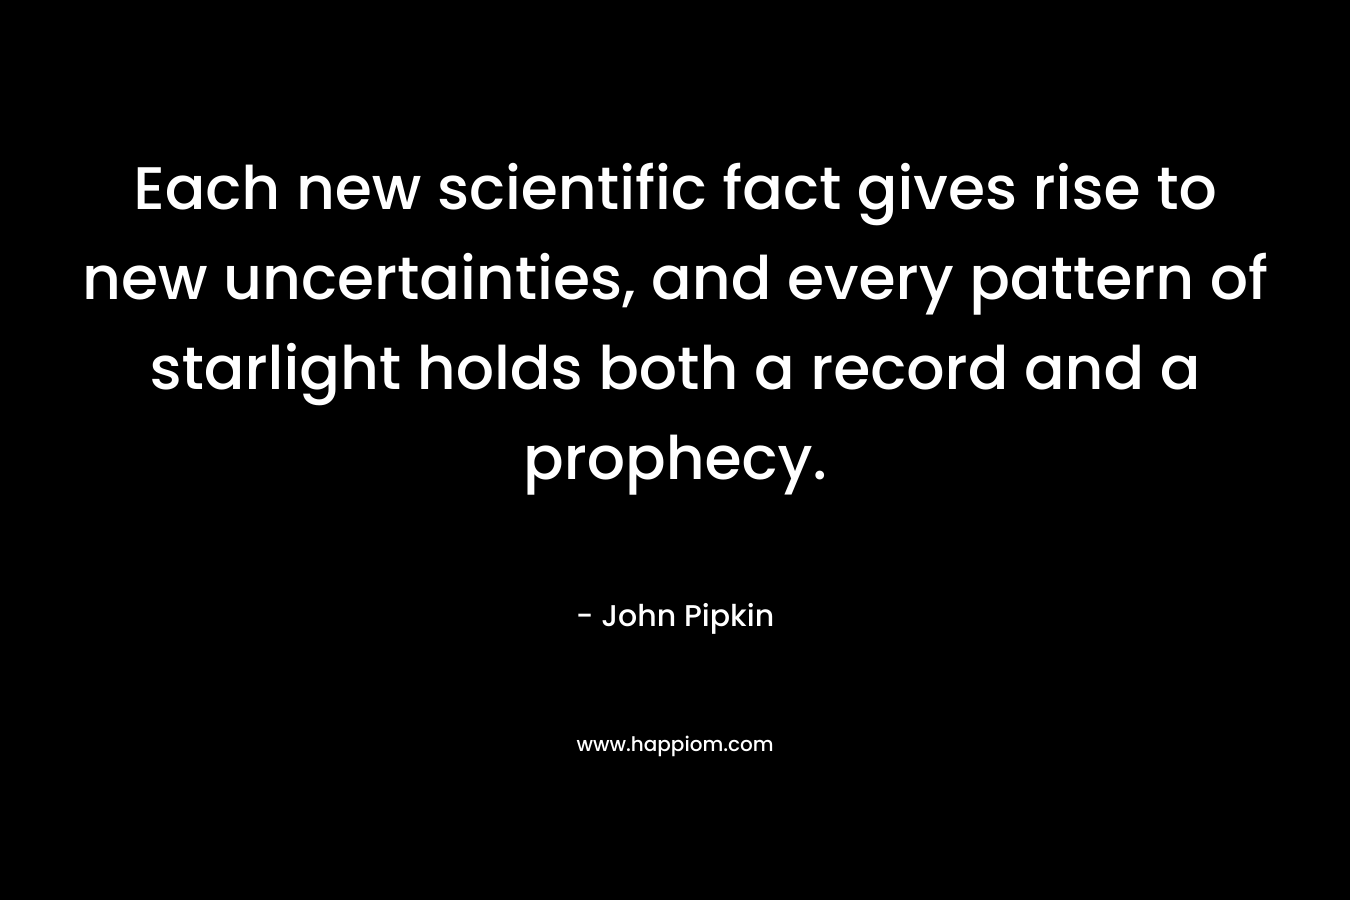 Each new scientific fact gives rise to new uncertainties, and every pattern of starlight holds both a record and a prophecy.